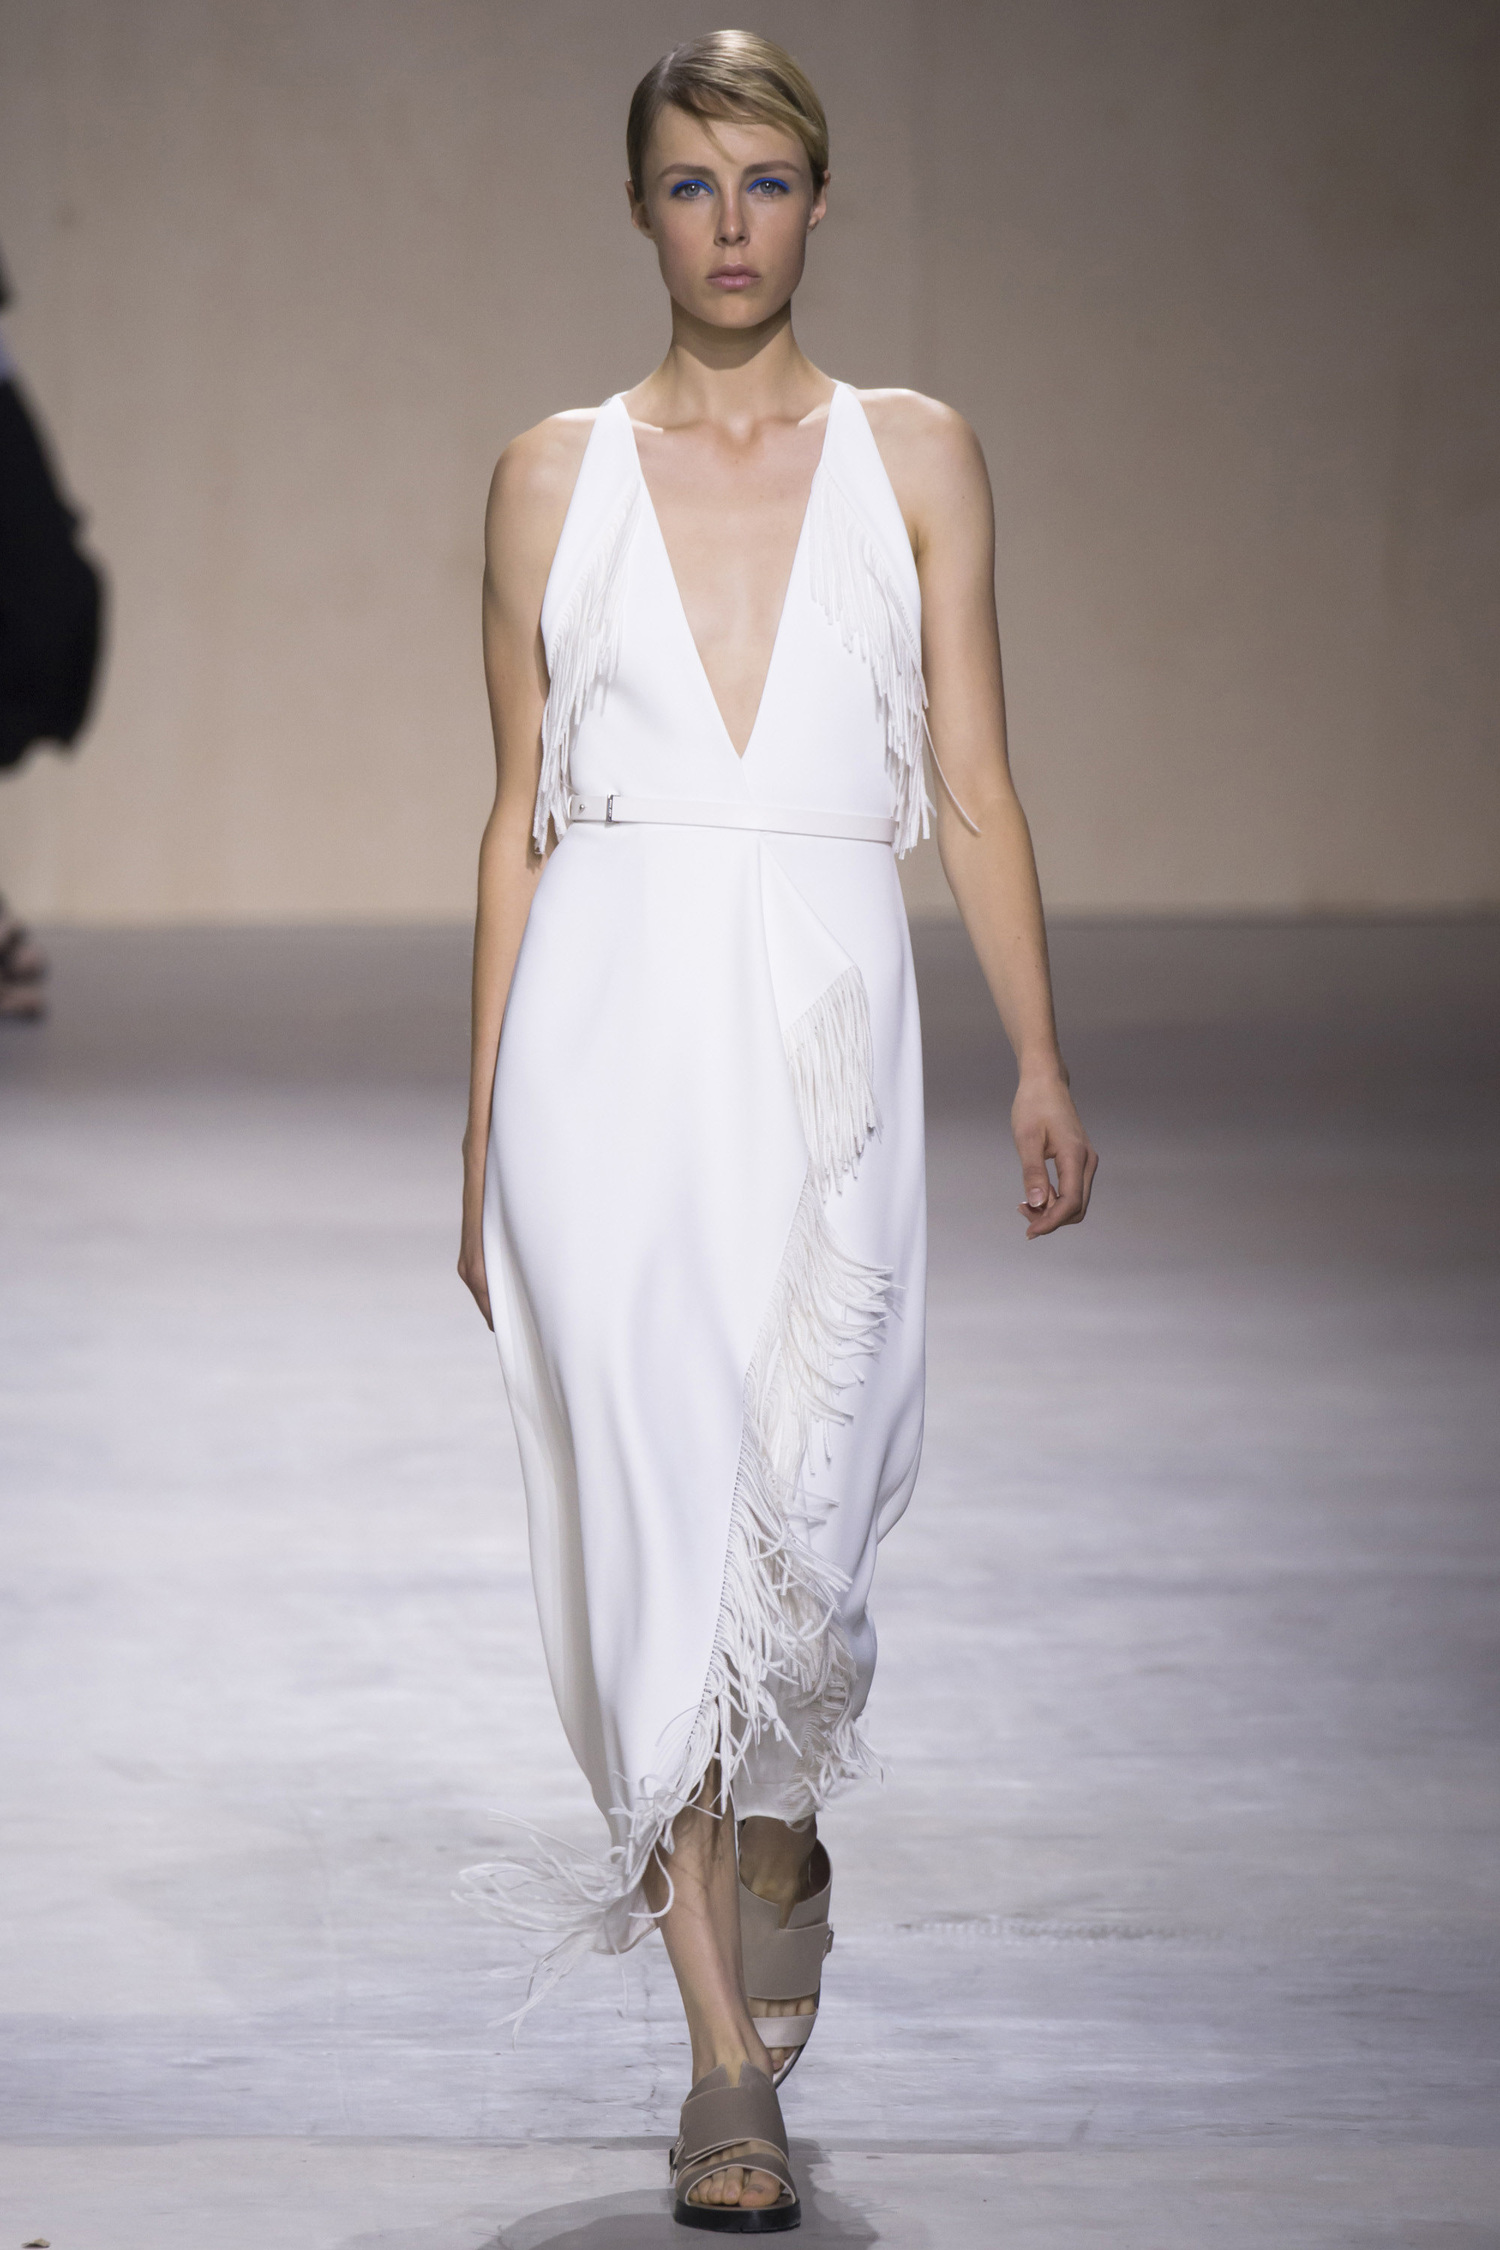 » The Roundup! Top 10 Hottest NYFW Shows